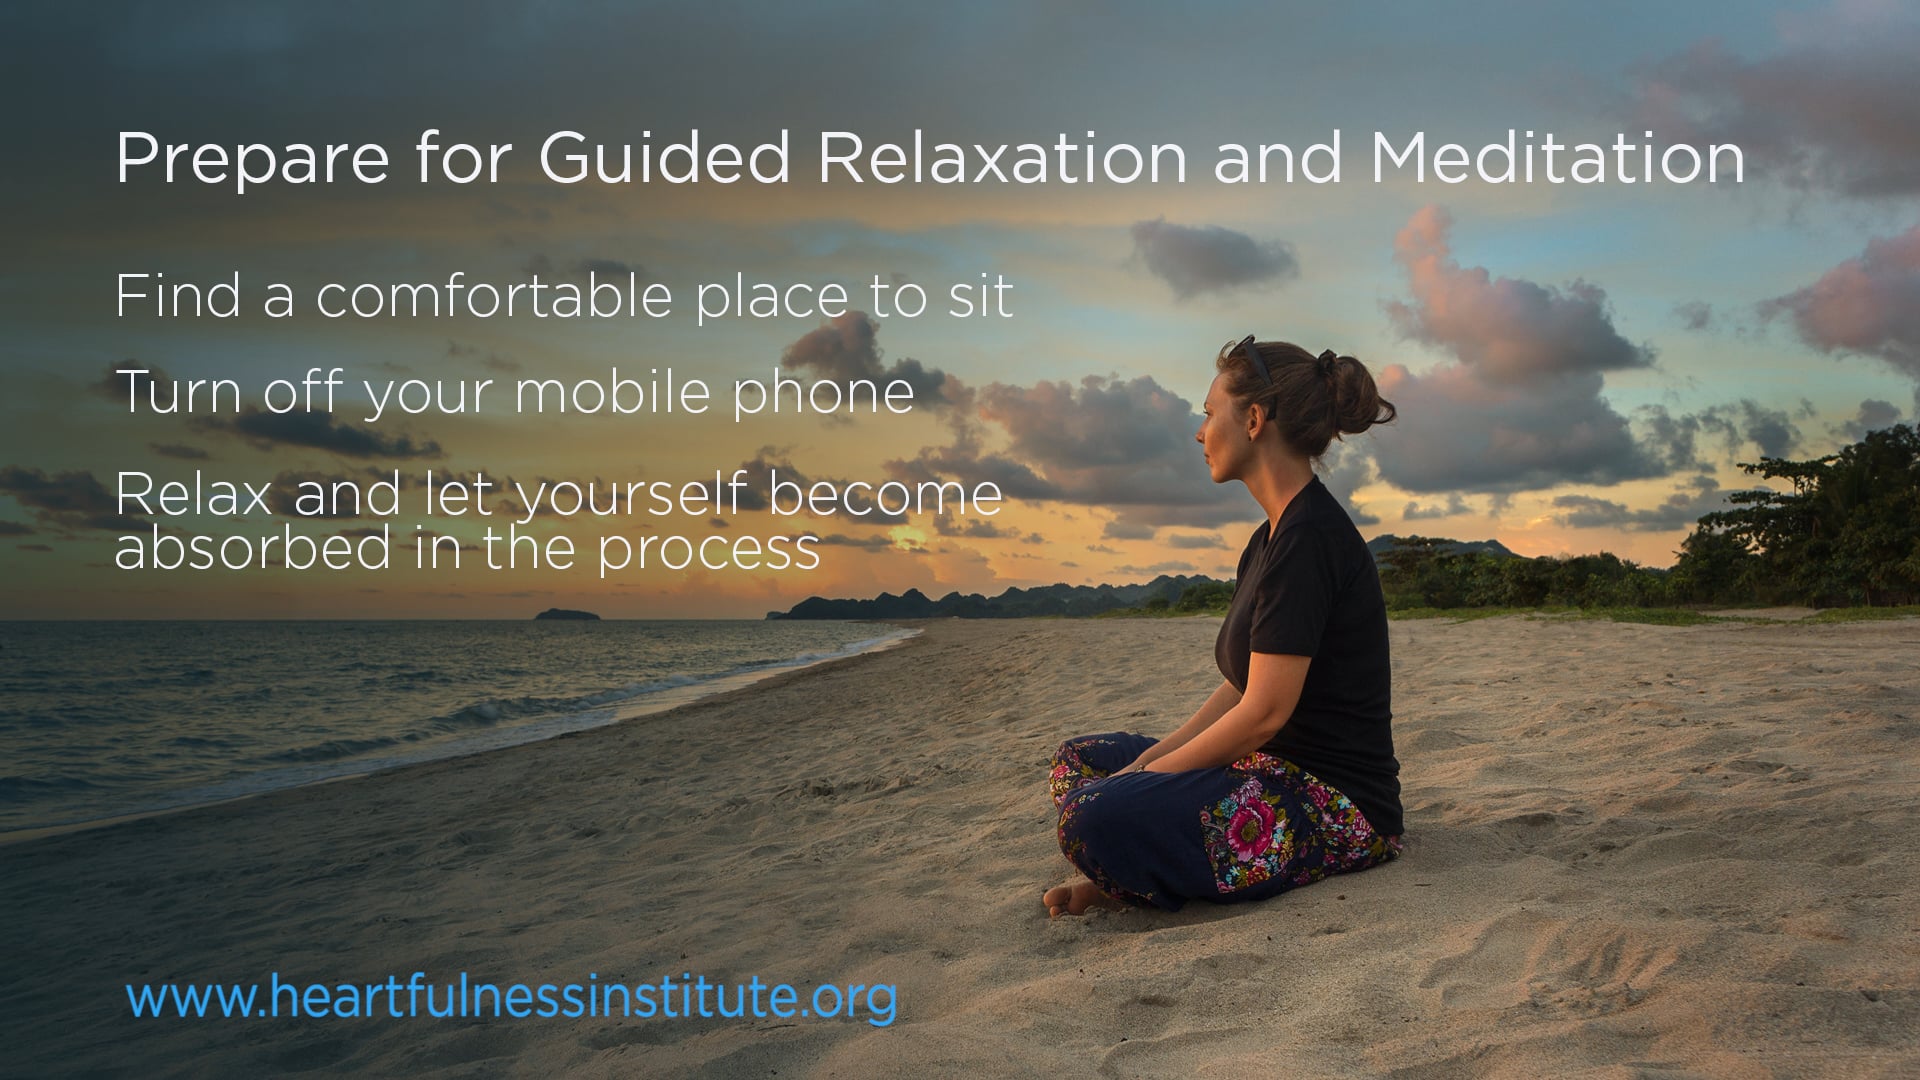 Guided Relaxation and Meditation